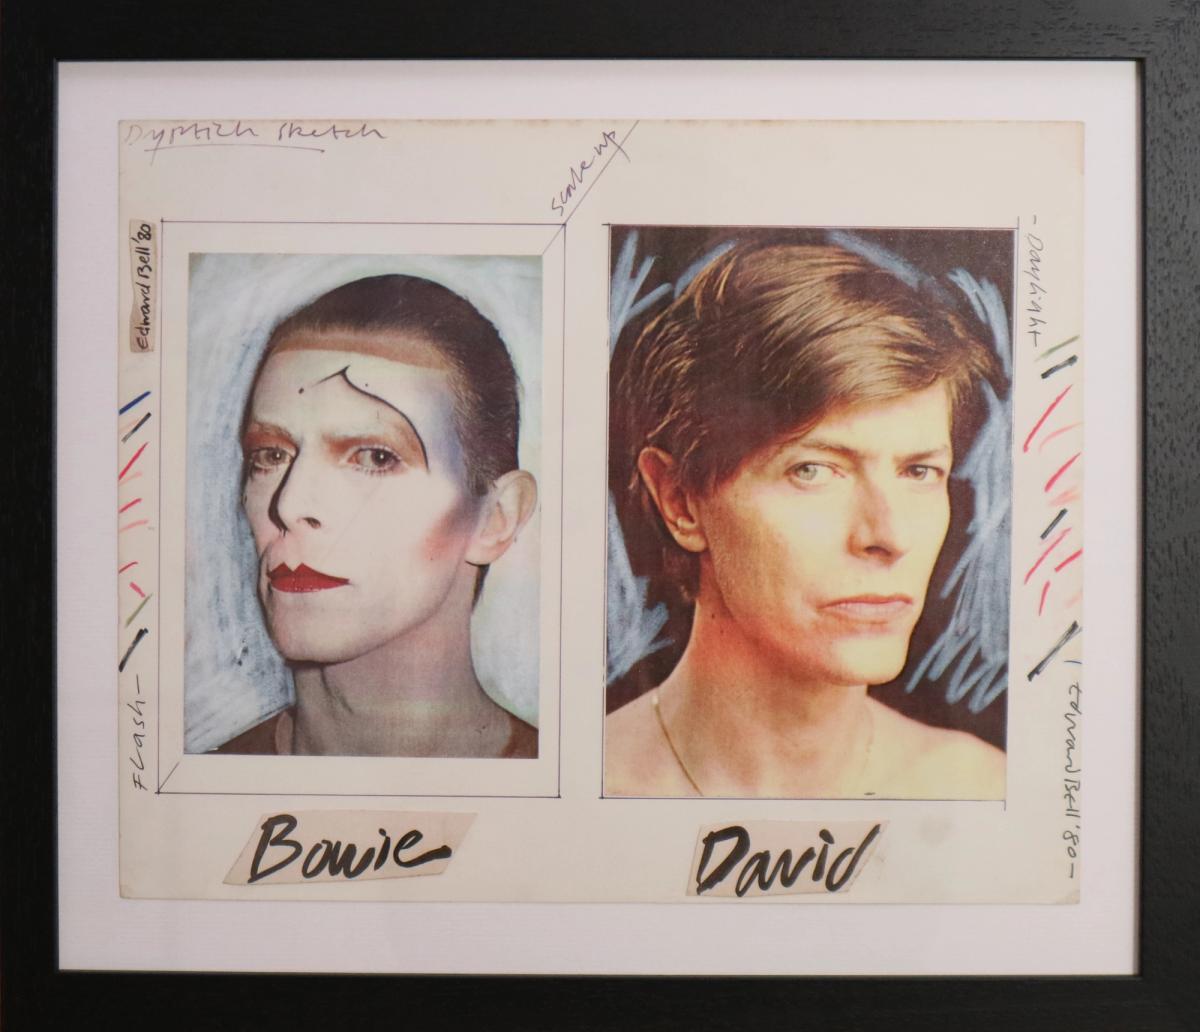 Let's bid: David Bowie album artwork for sale, direct from the artist ...